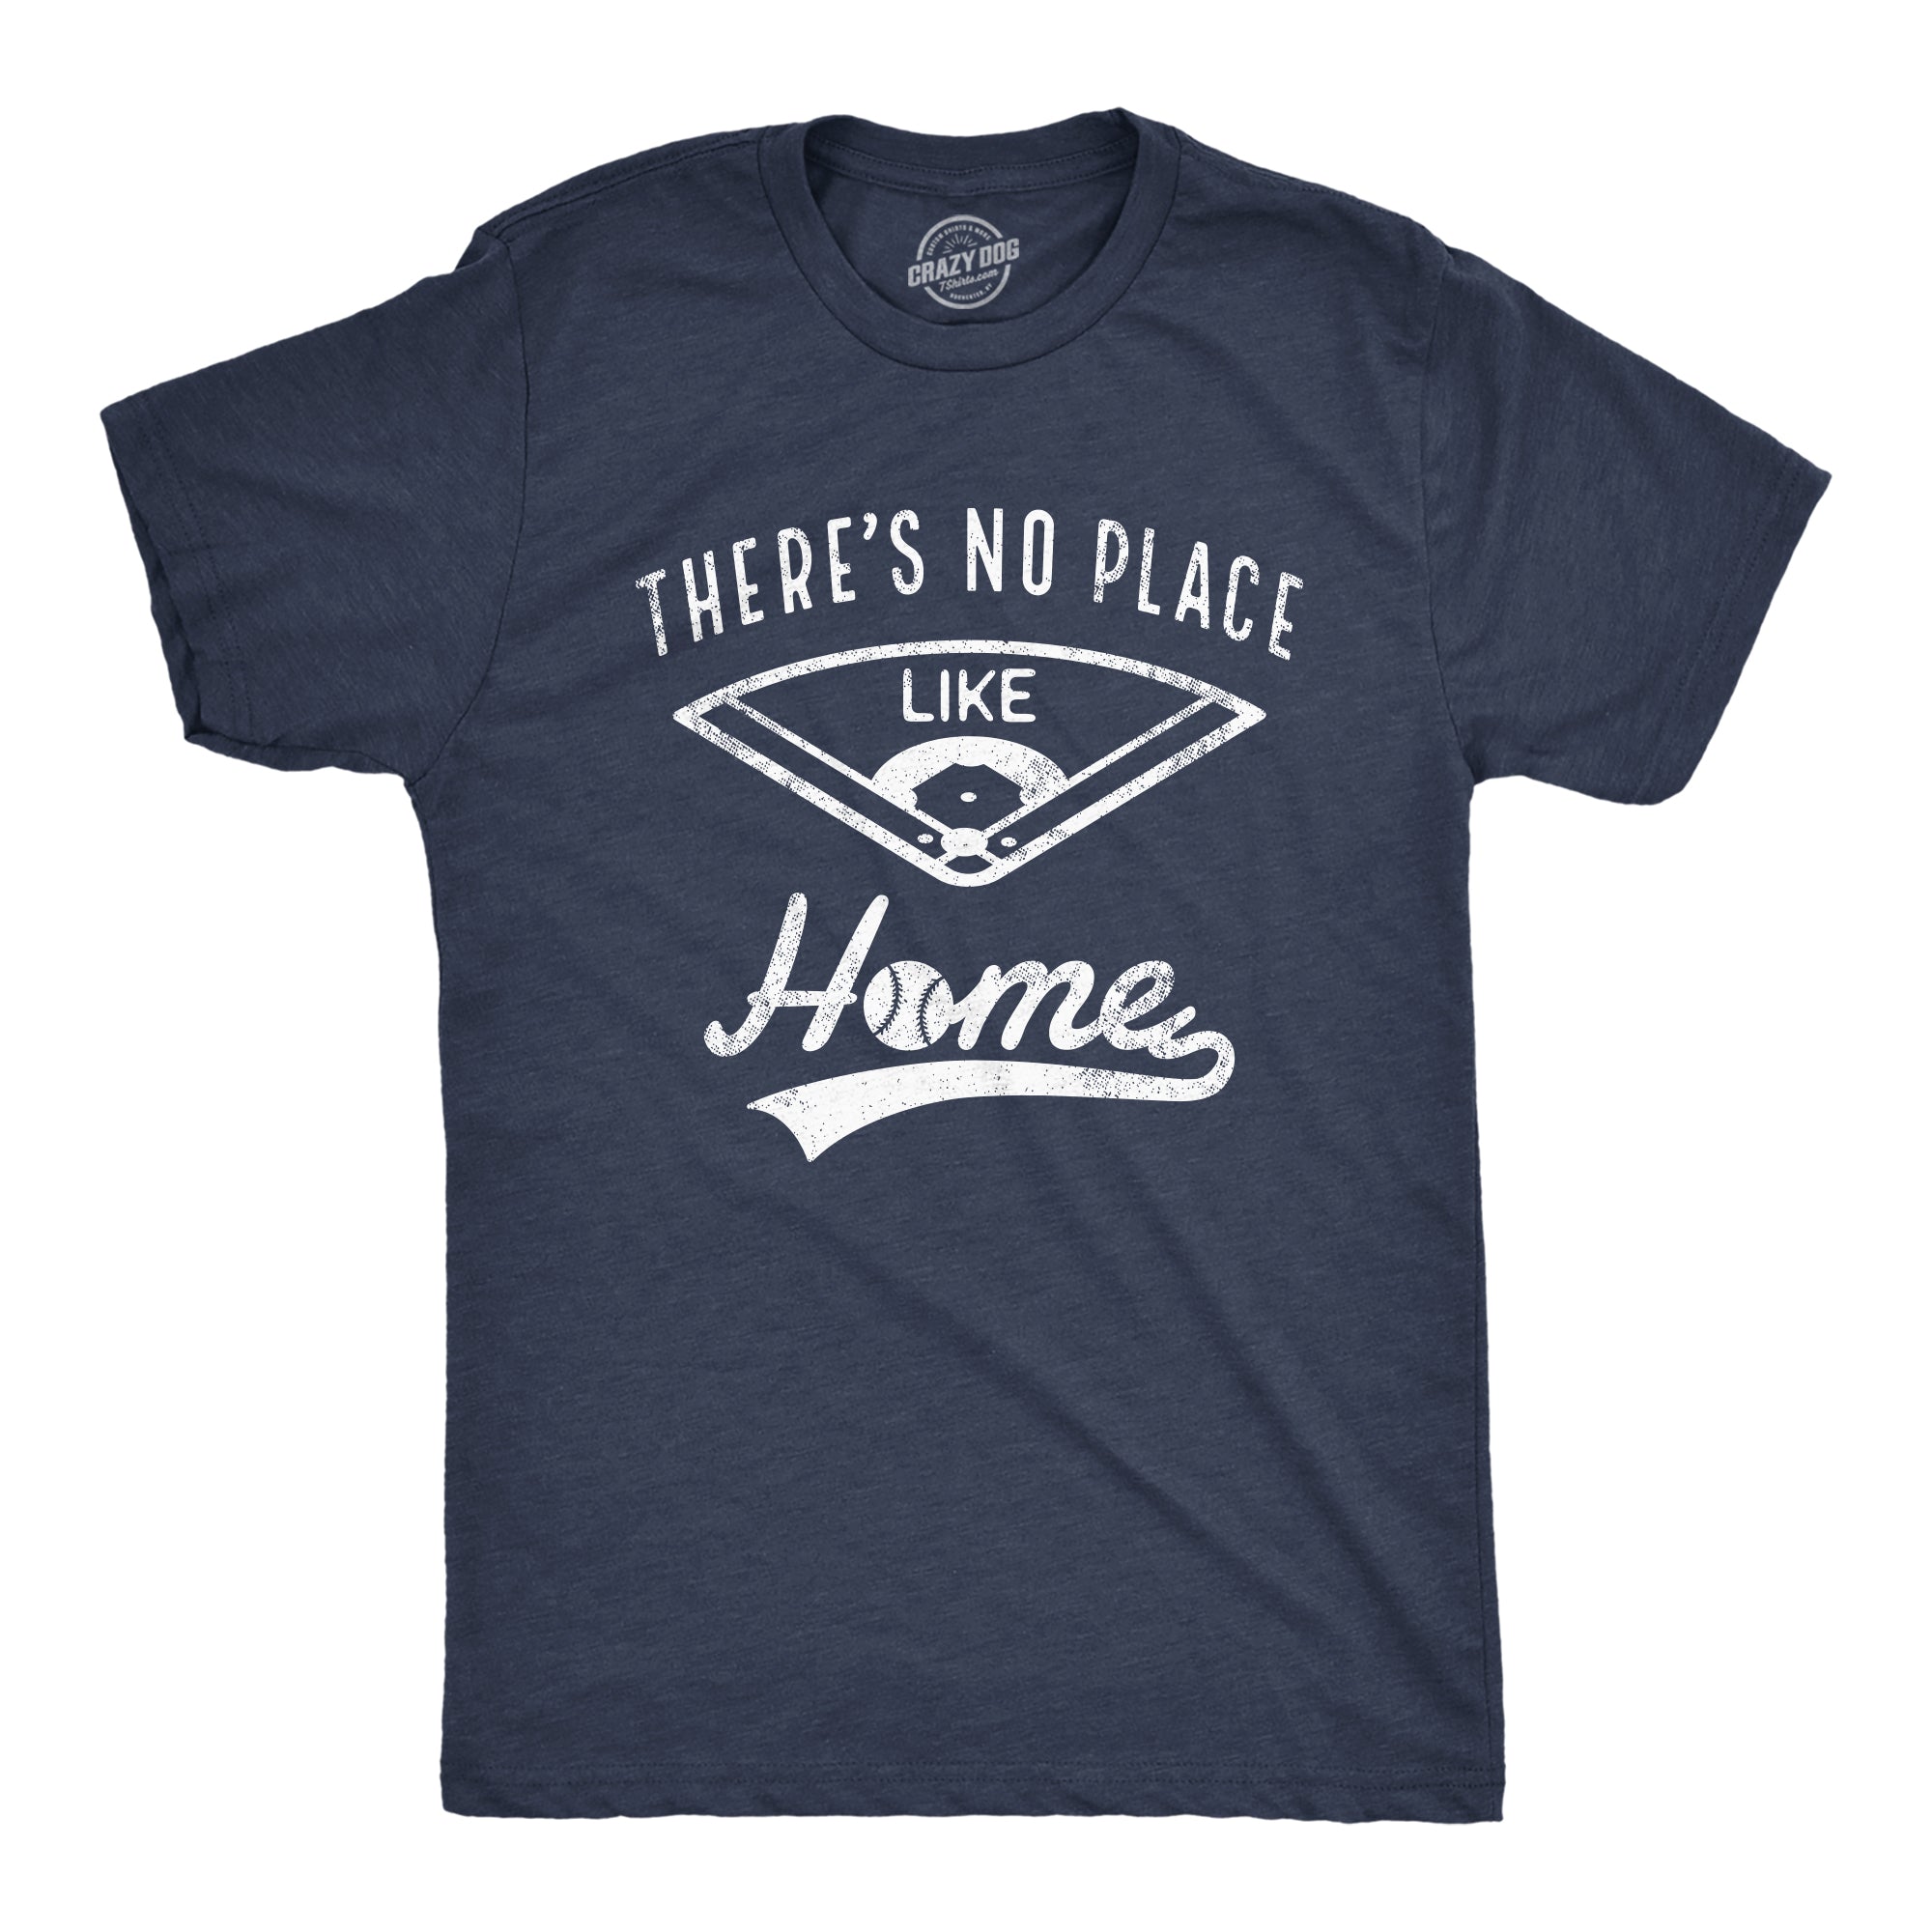 Funny Heather Navy Theres No Place Like Home Mens T Shirt Nerdy Baseball Sarcastic Tee